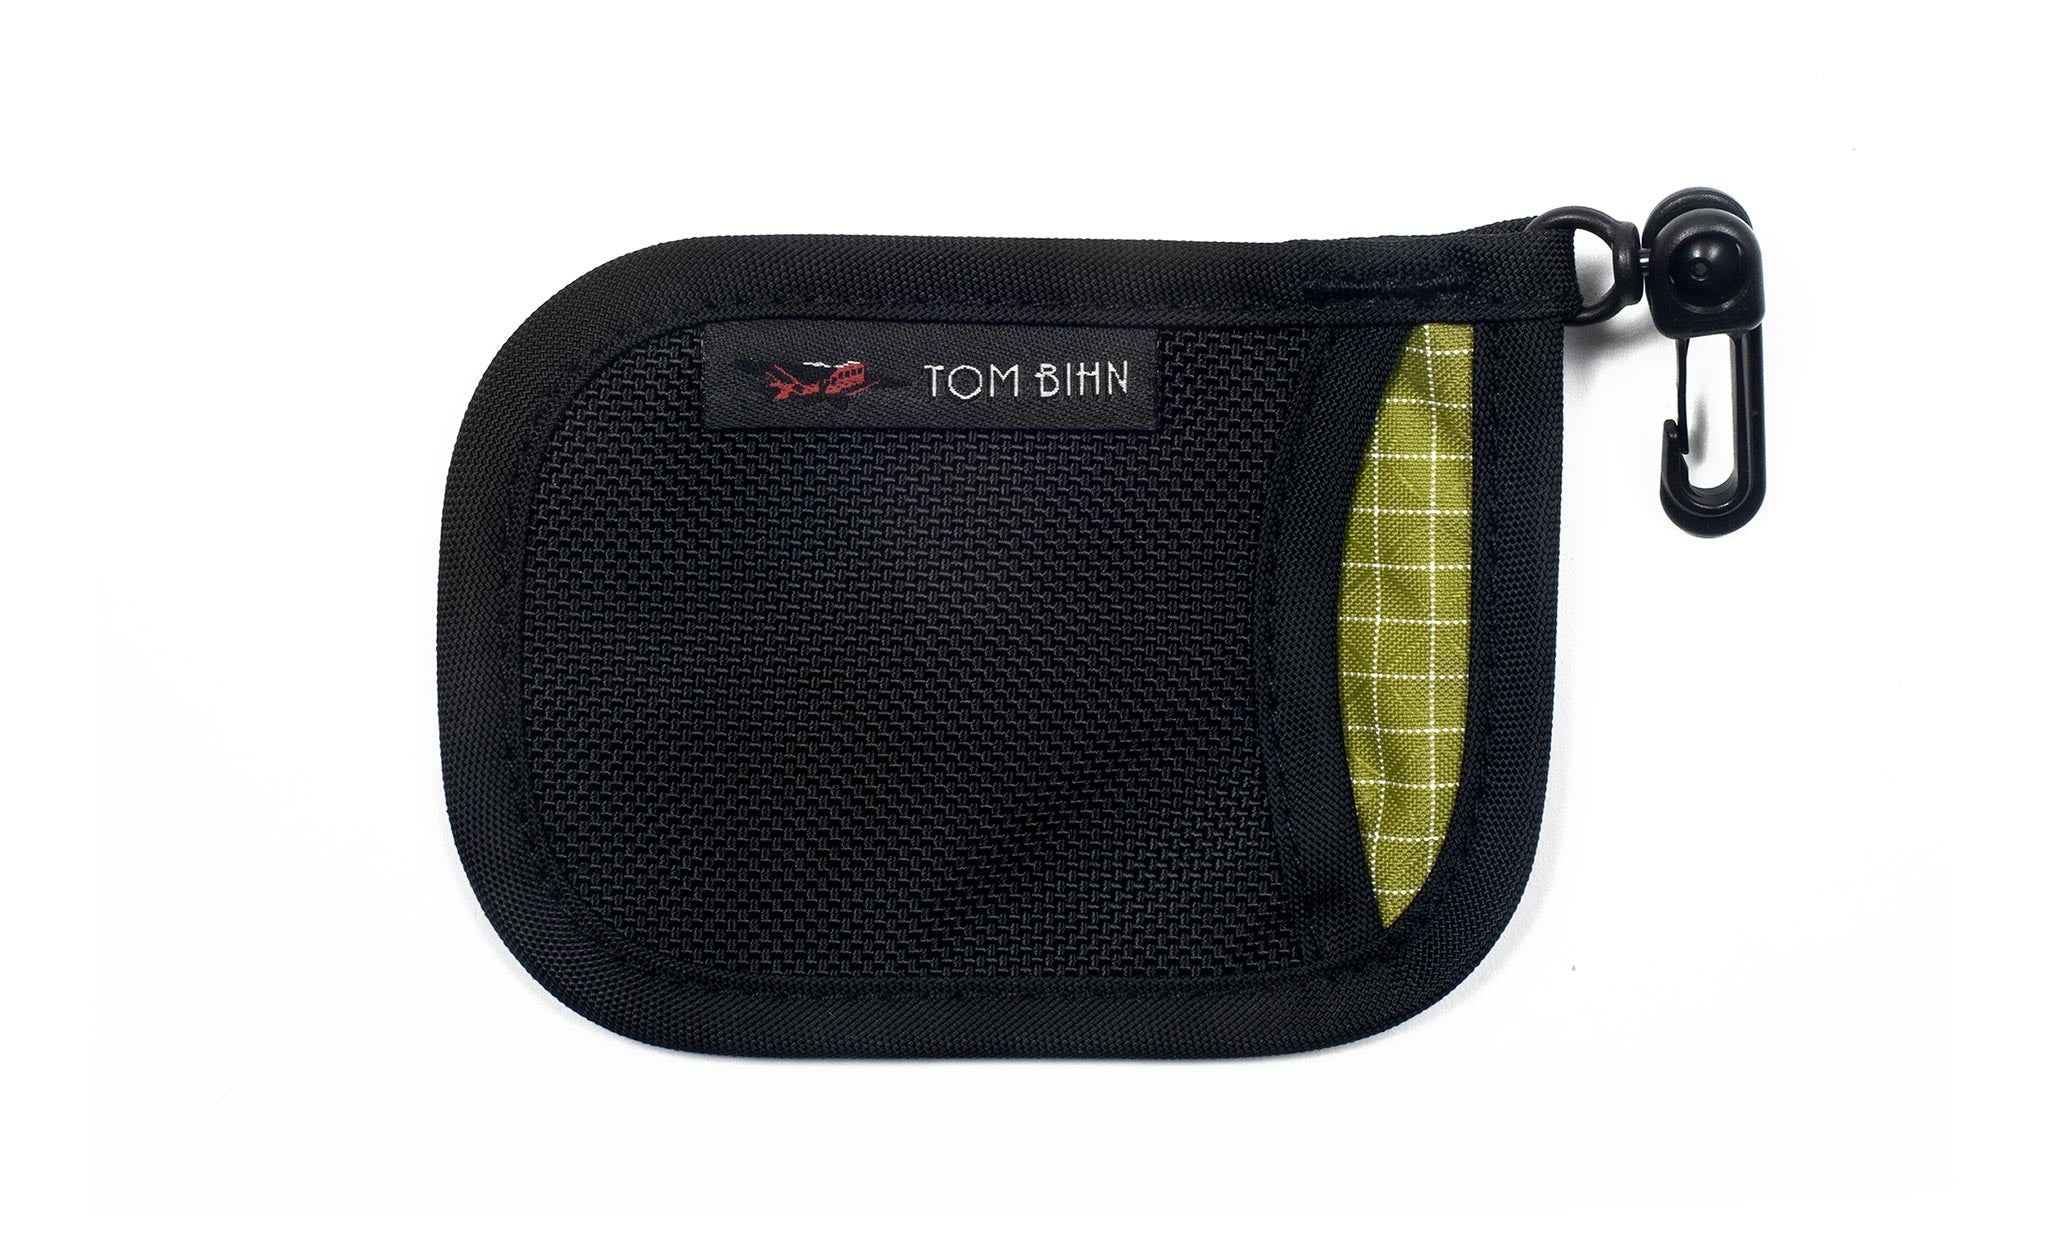 TOM BIHN Pocket Pouch, For Business Cards, Credit Cards, Or ID, 0.6oz